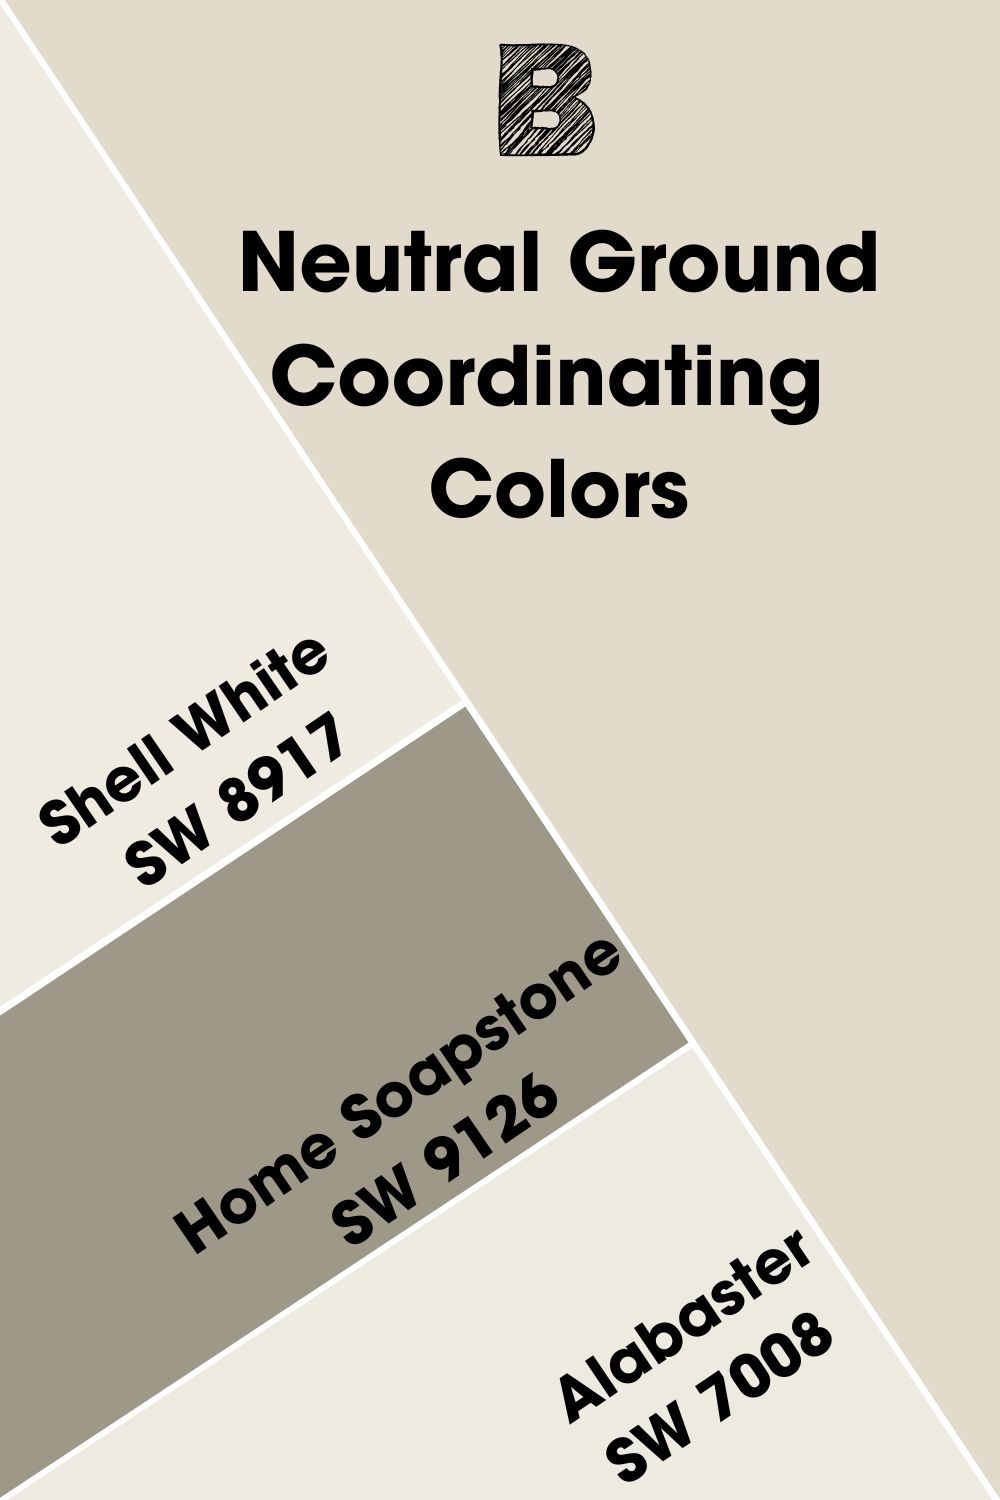  Sherwin Williams Neutral Ground Coordinating Colors